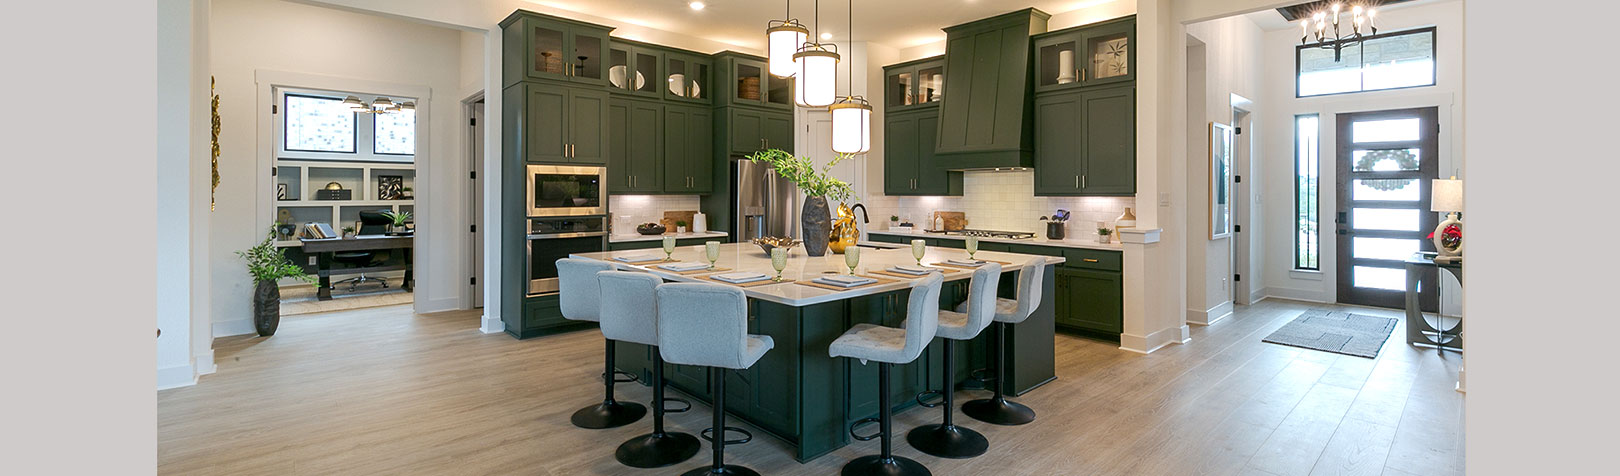 Kitchen with large island, custom vent hood and Shaker doors in Saba green